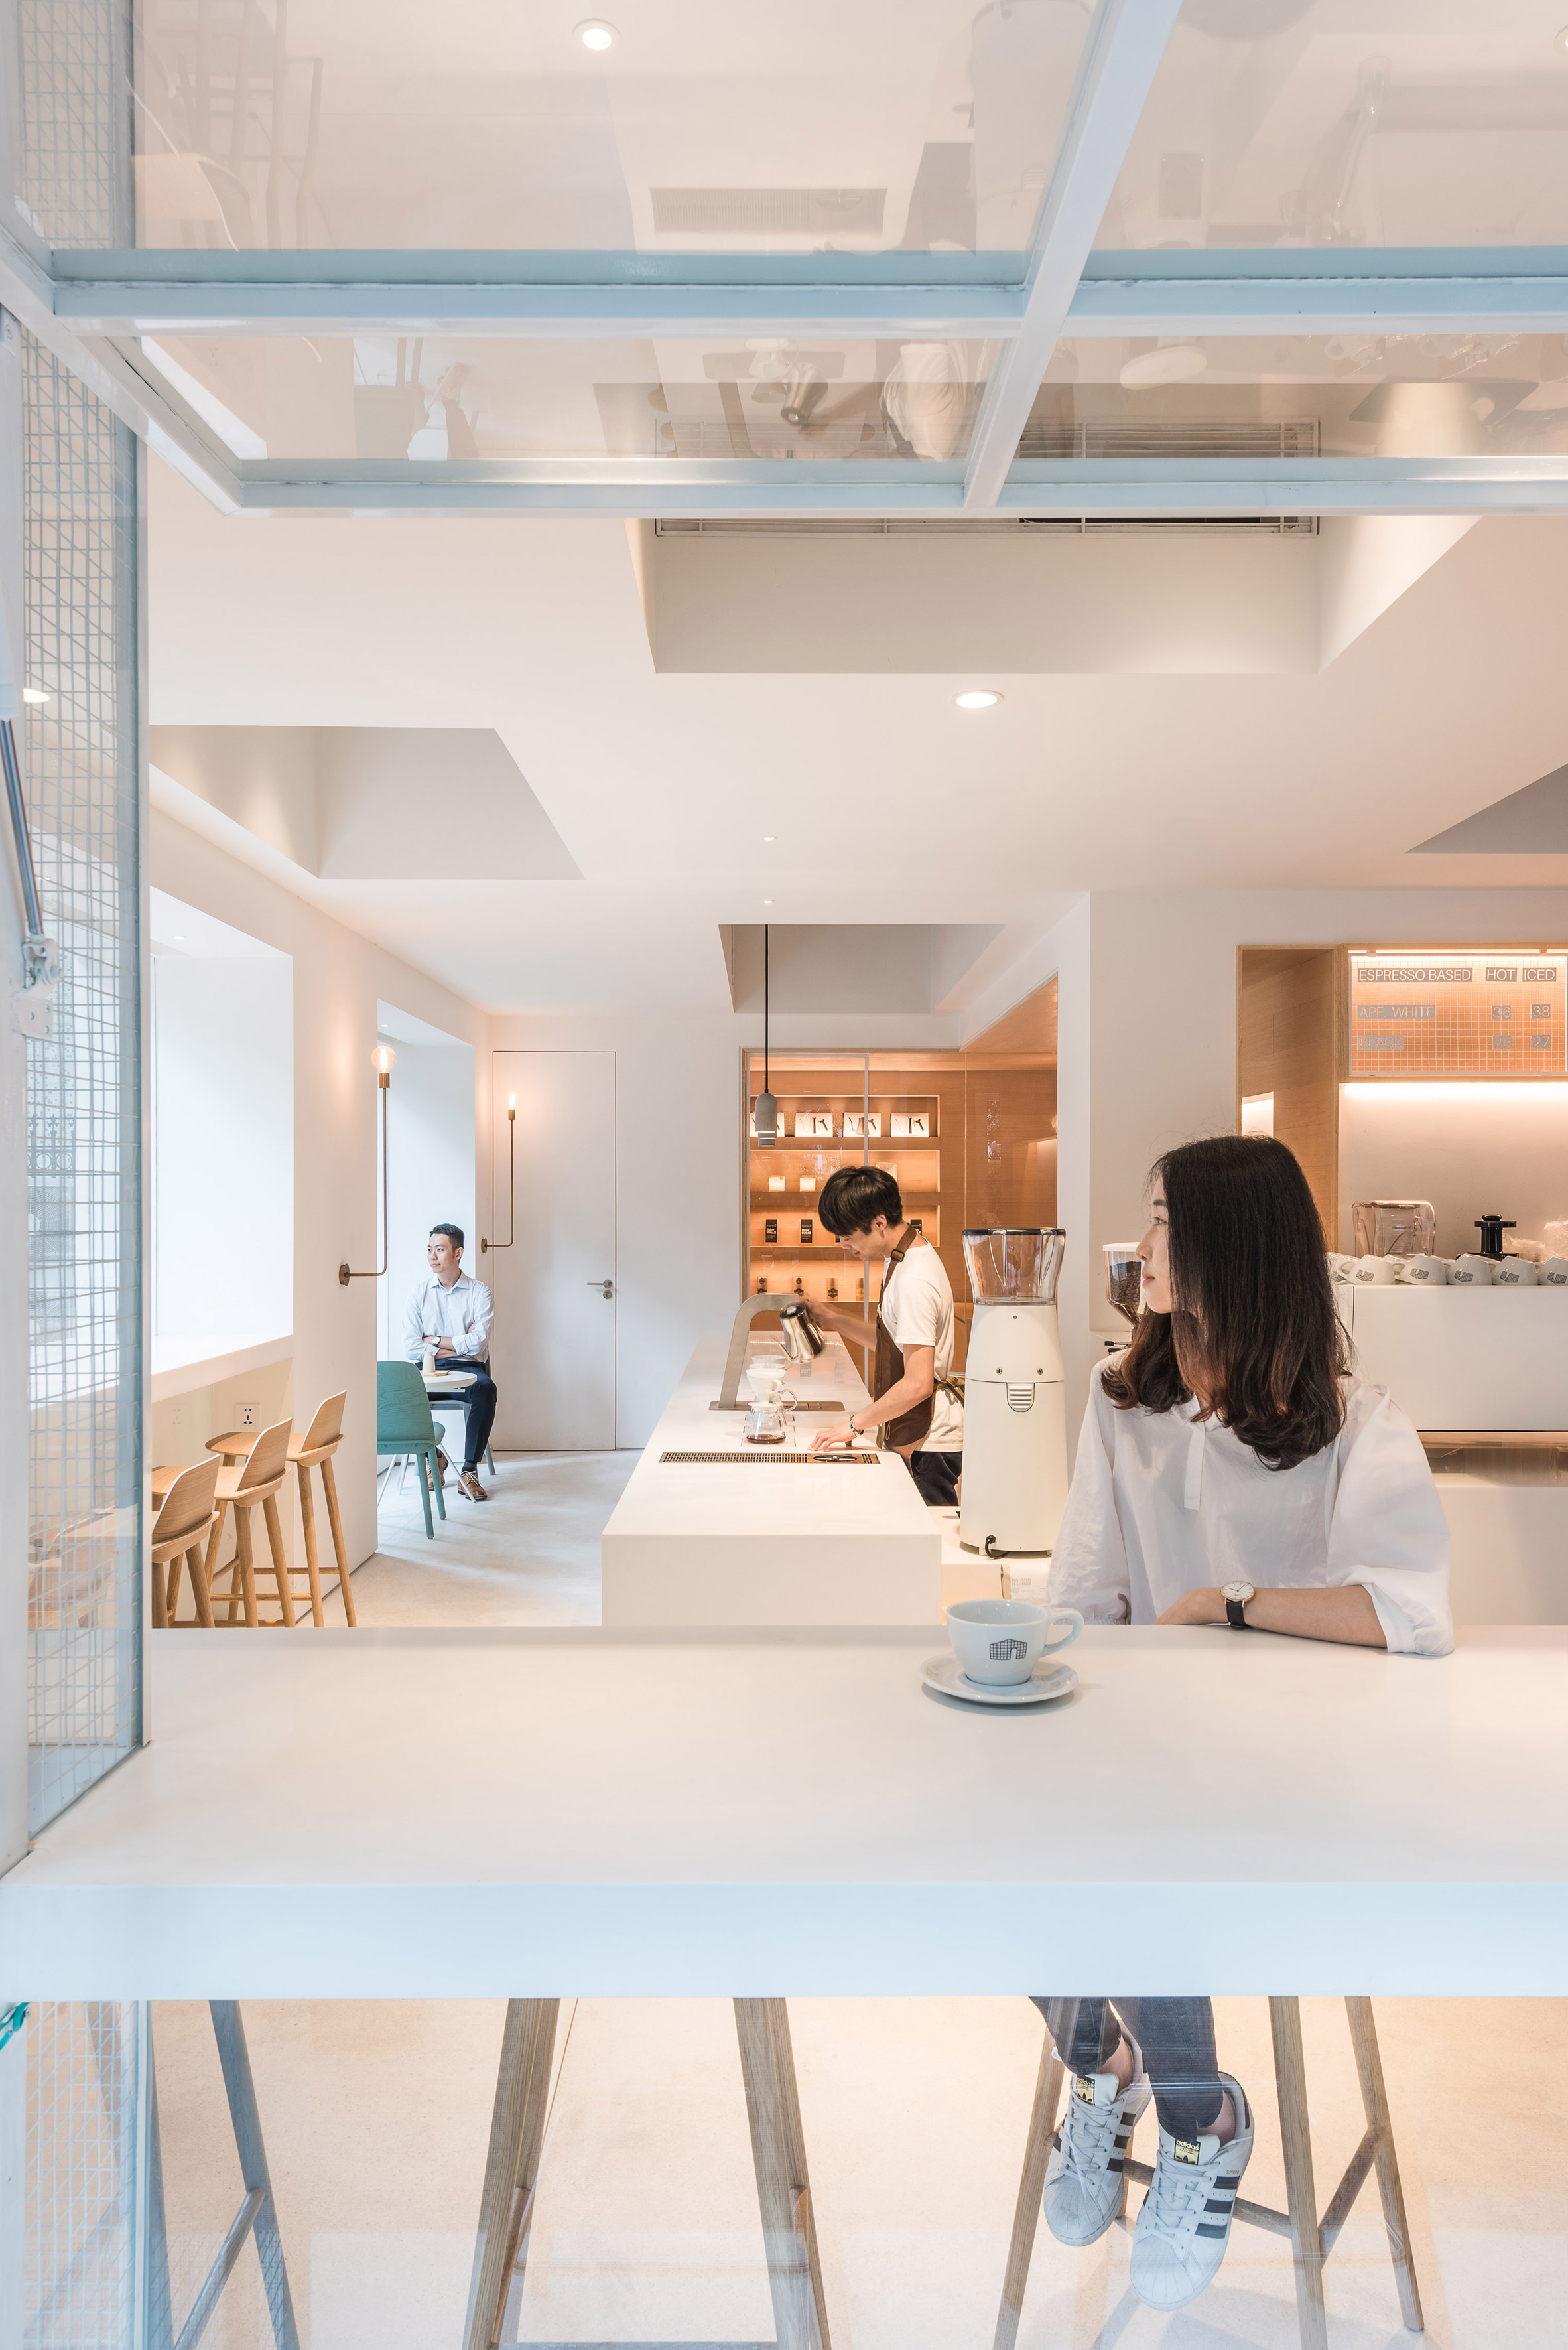 in-and-between-boxes-lukstudio-interiors-atelier-peter-fong-offices-china_dezeen_2364_col_10